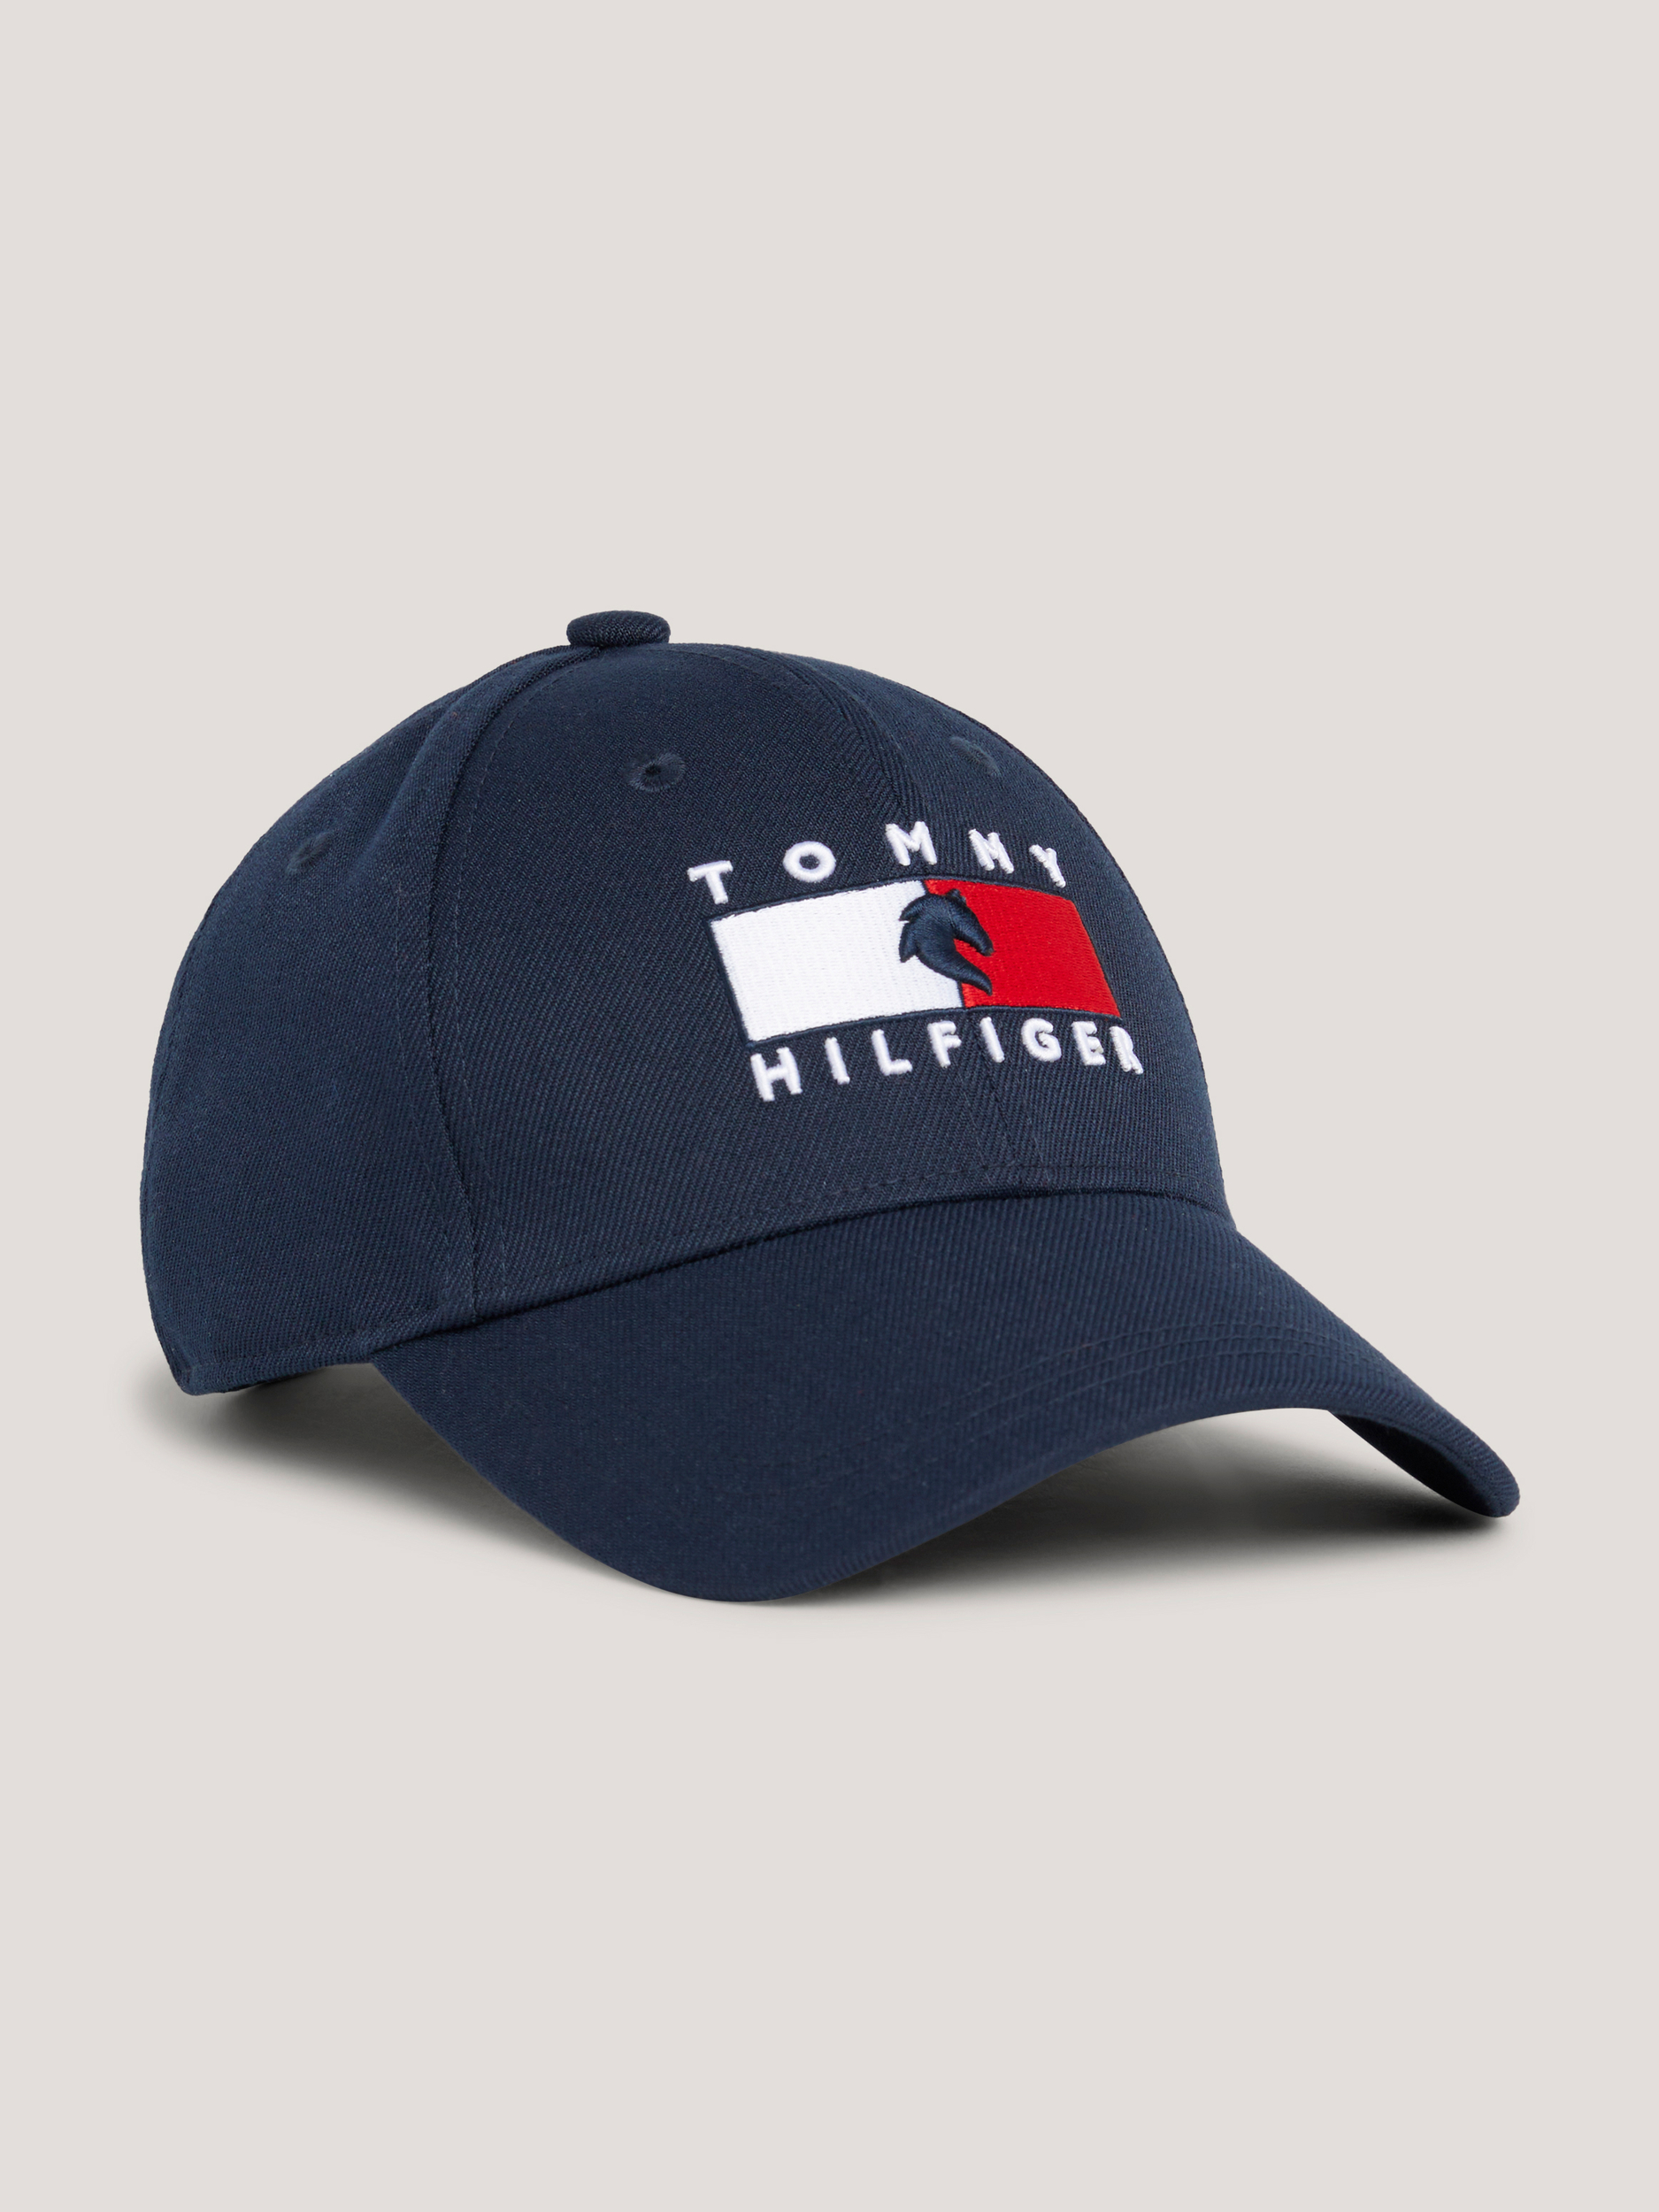 casquette-tommy-hilfiger-montreal-navy (1)